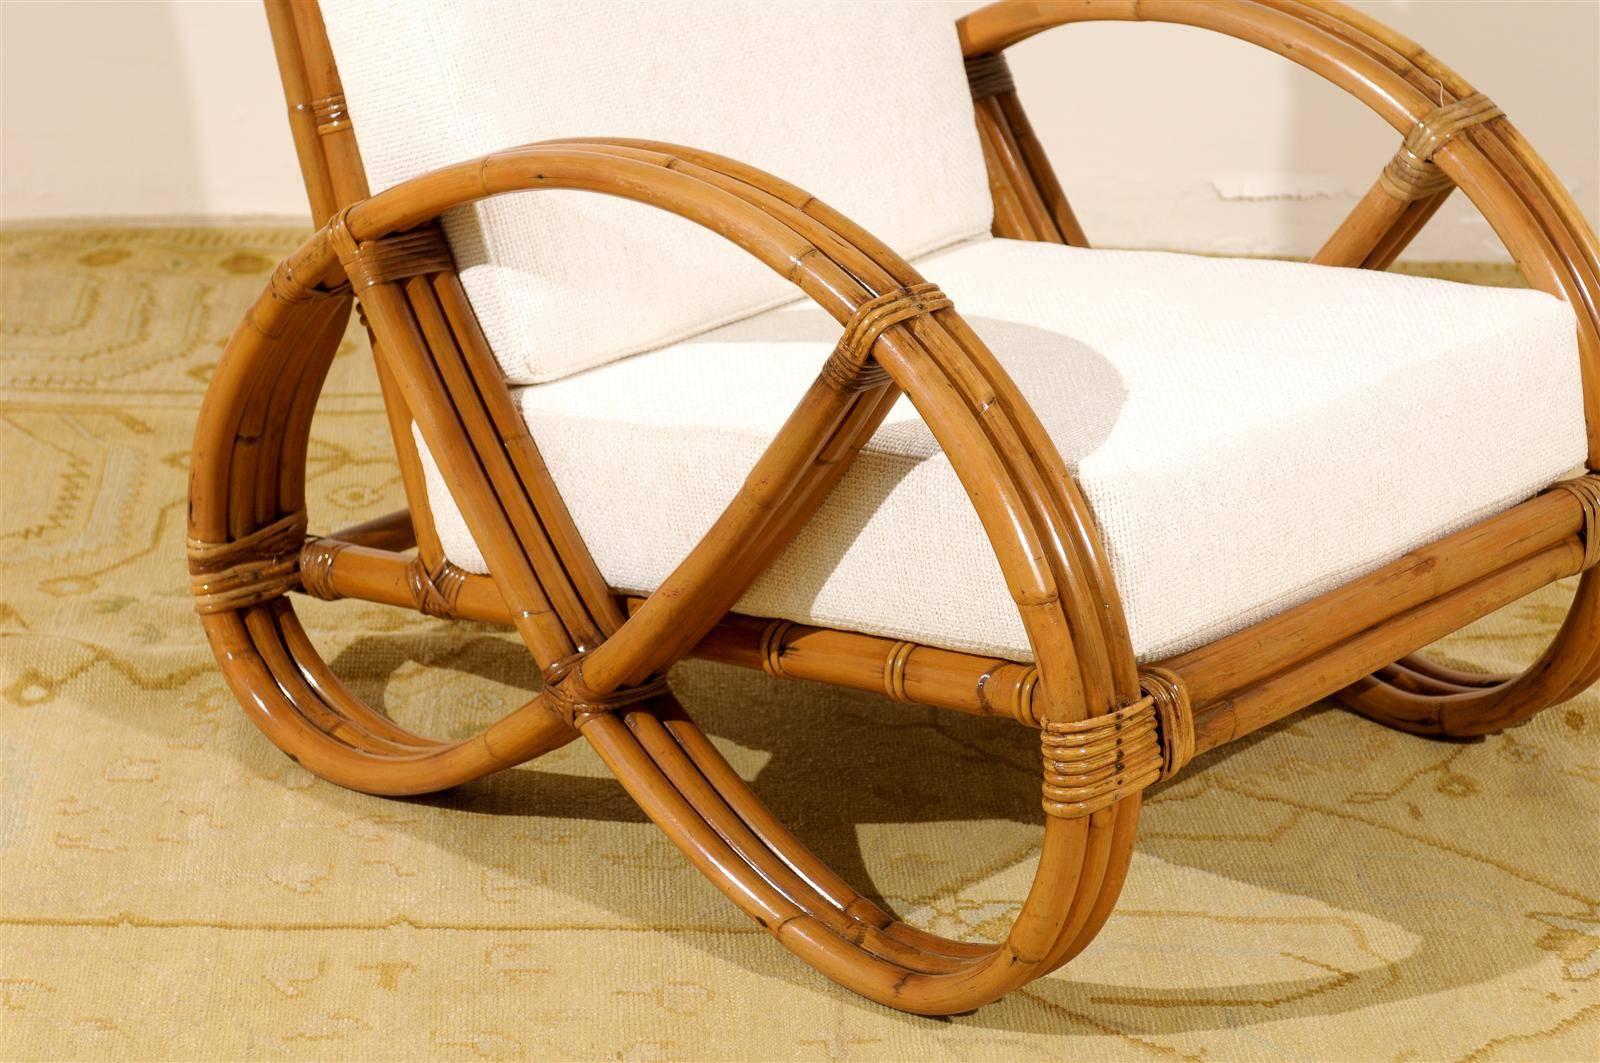 Stellar Restored Pair of Rattan Pretzel and Cane Loungers, circa 1940 For Sale 1